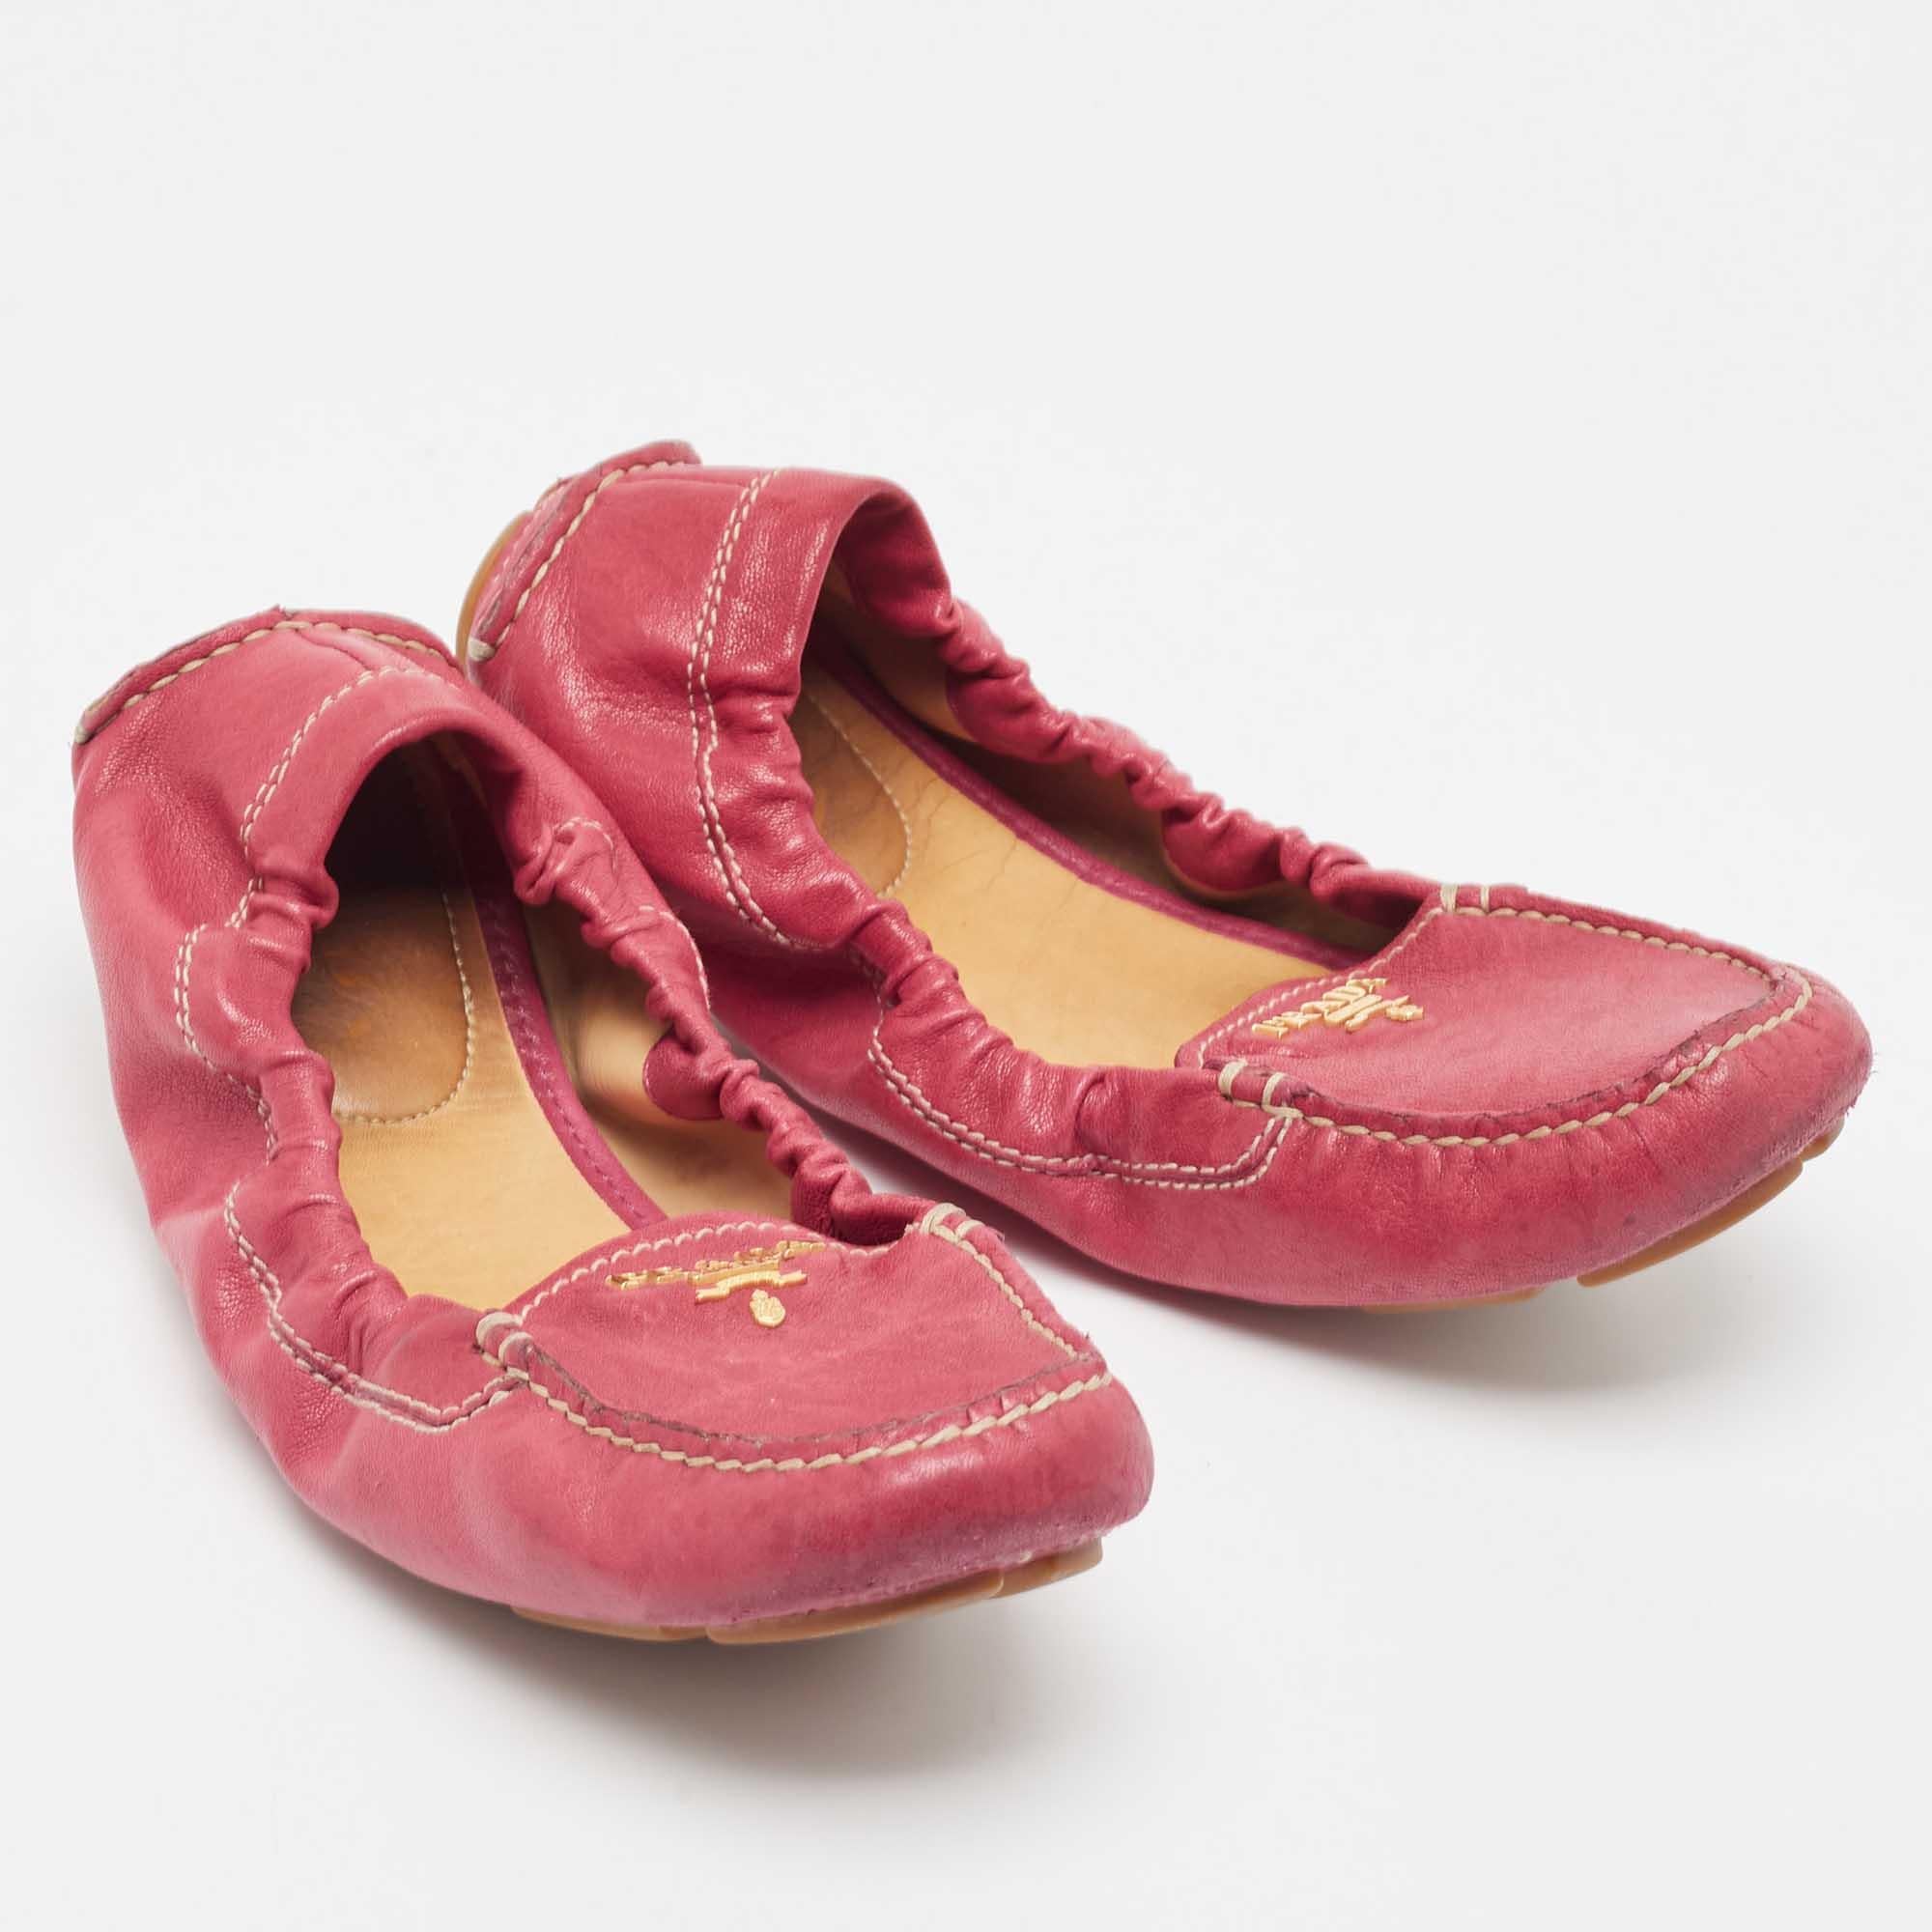 Prada Pink Leather Scrunch Slip On Loafers Size 36.5 In Good Condition For Sale In Dubai, Al Qouz 2